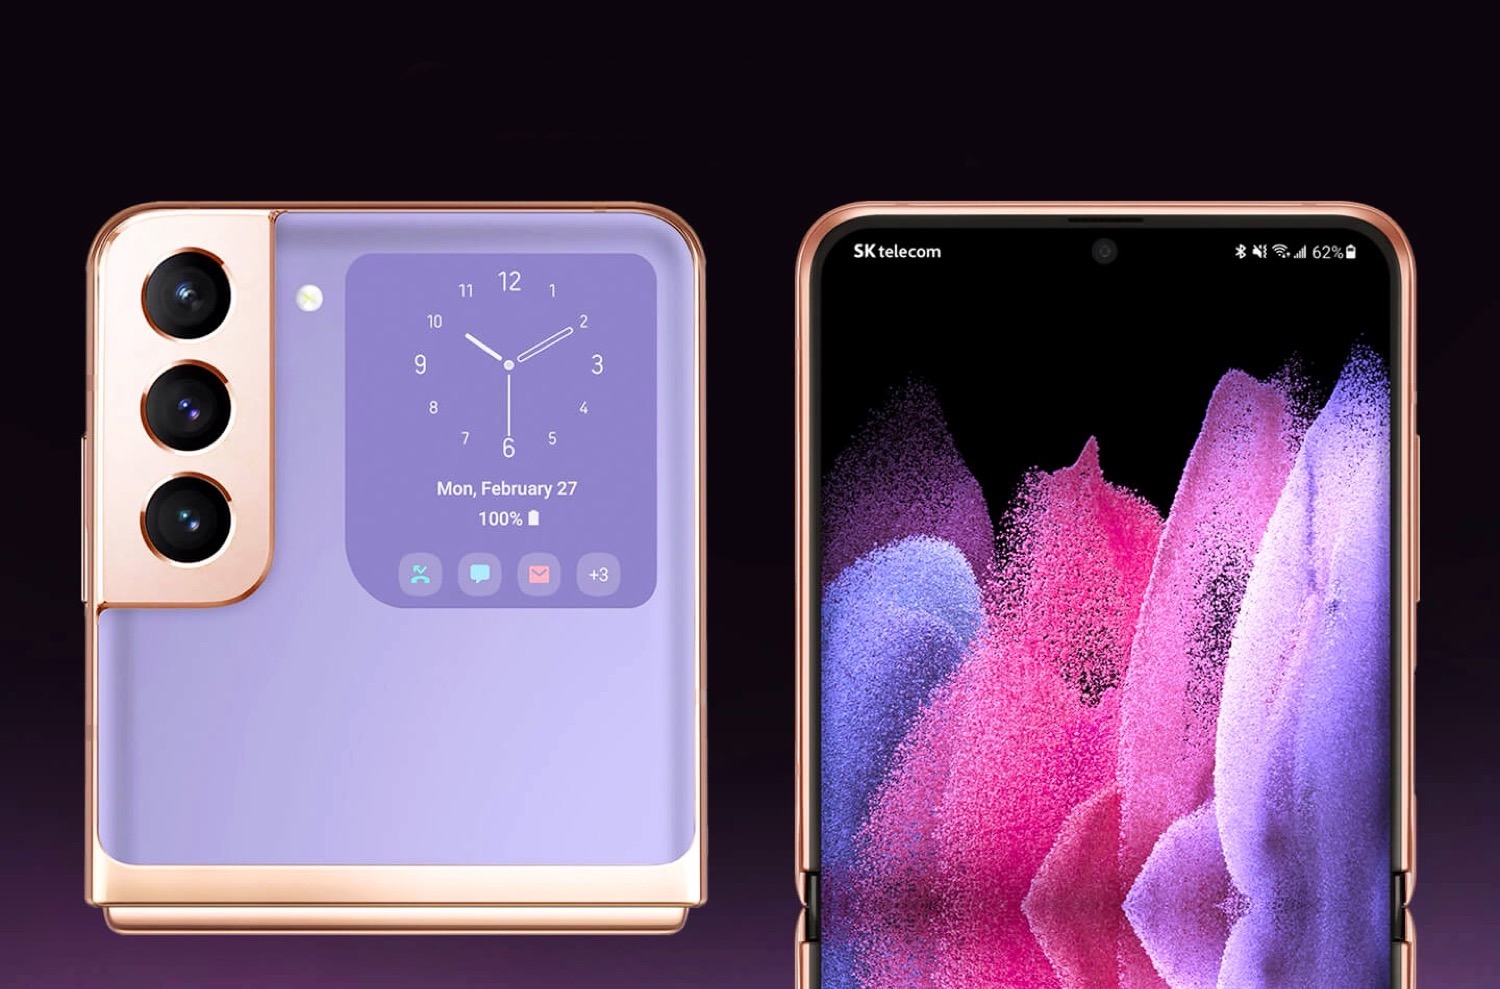 A leak reveals more details about Samsung’s upcoming Galaxy Z Fold and Galaxy Z Flip smartphones